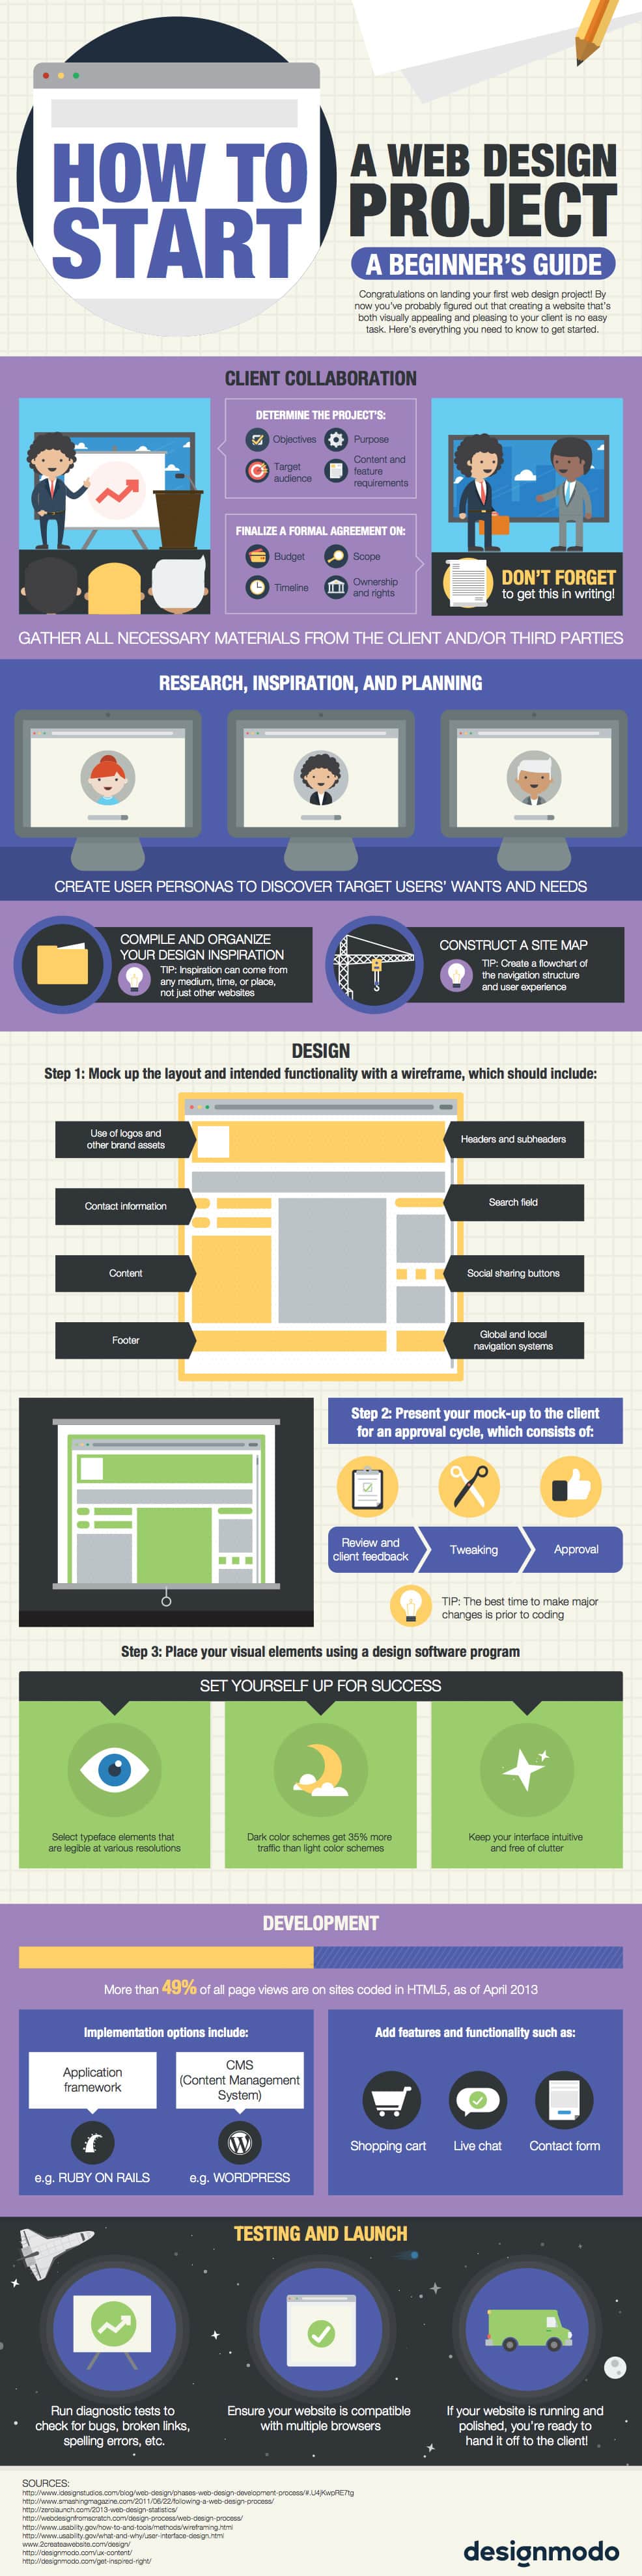 Start a Web Design Project [Infographic]